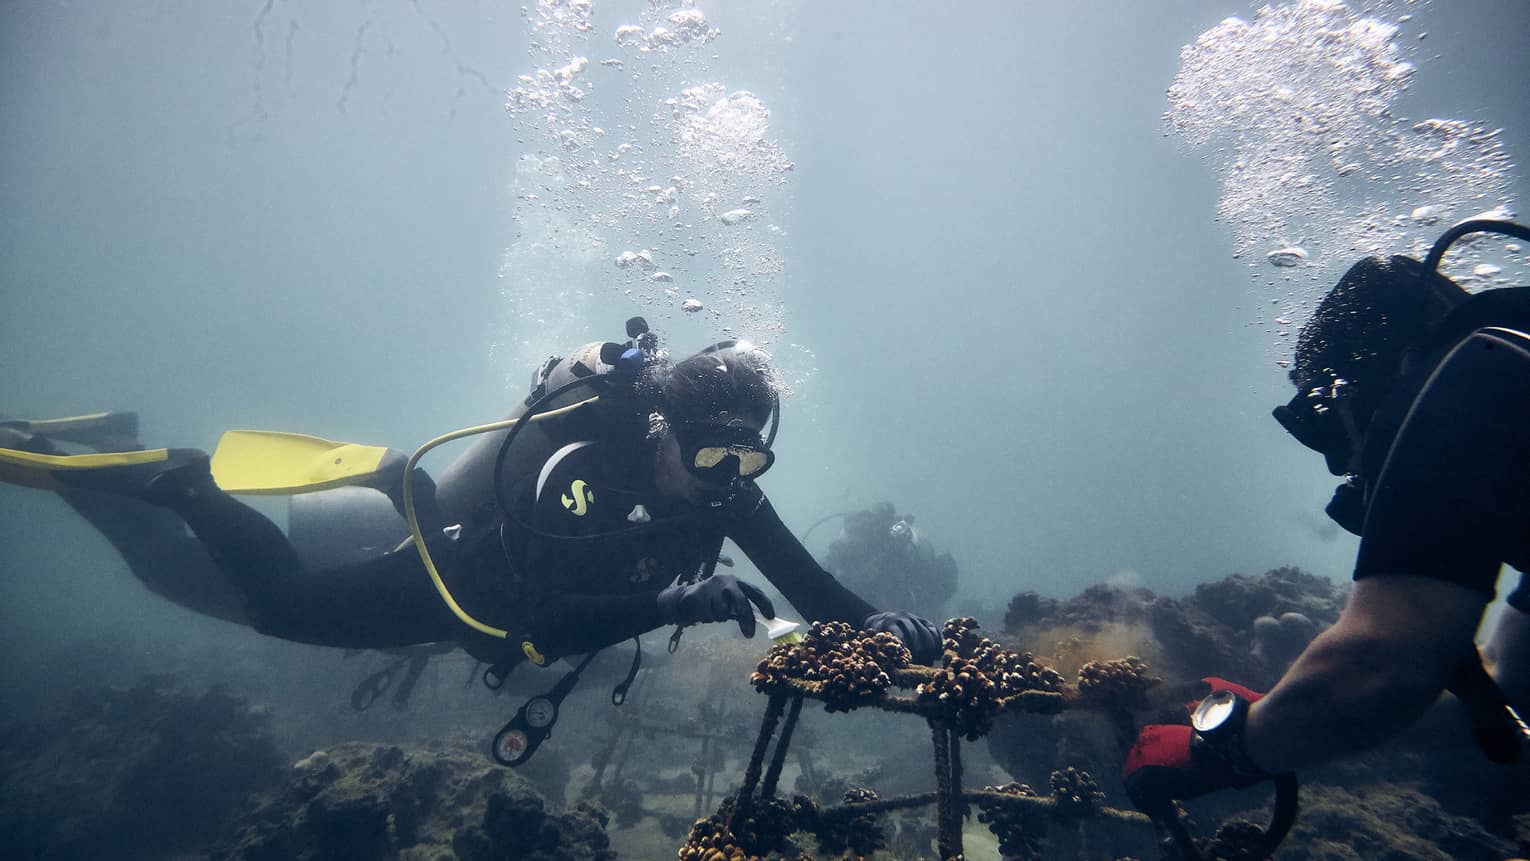 Two scuba divers inspect an underwater wreck